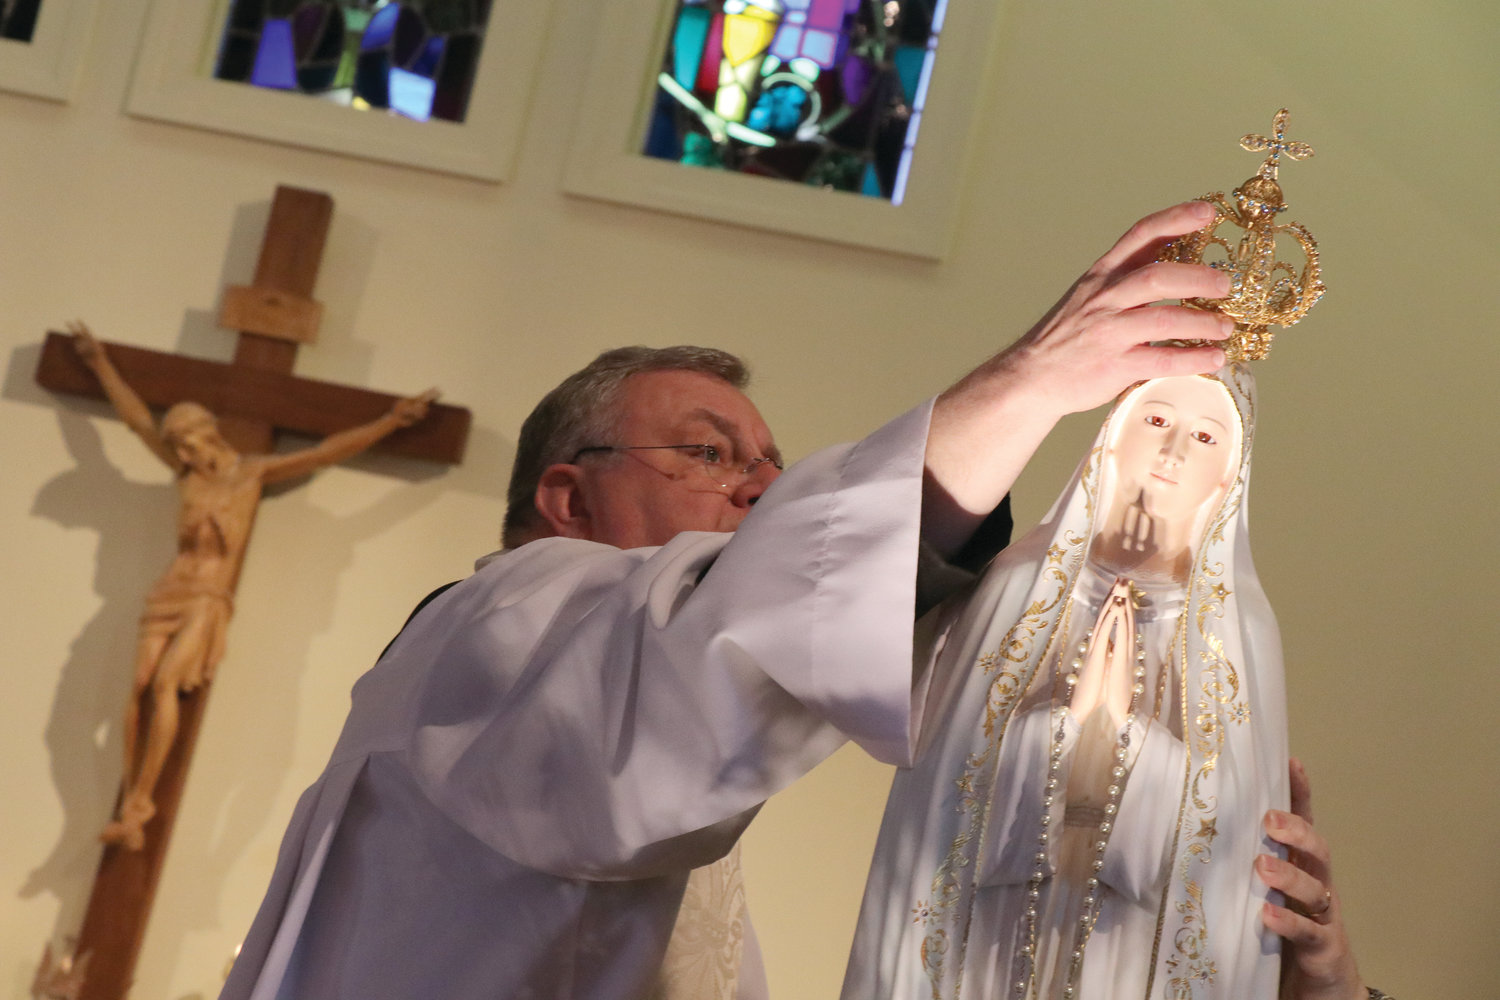 Father David Green, pastor of St. Martha Parish in East Providence, places a crown atop a statue of Our Lady of Fatima during the special day of renewal.